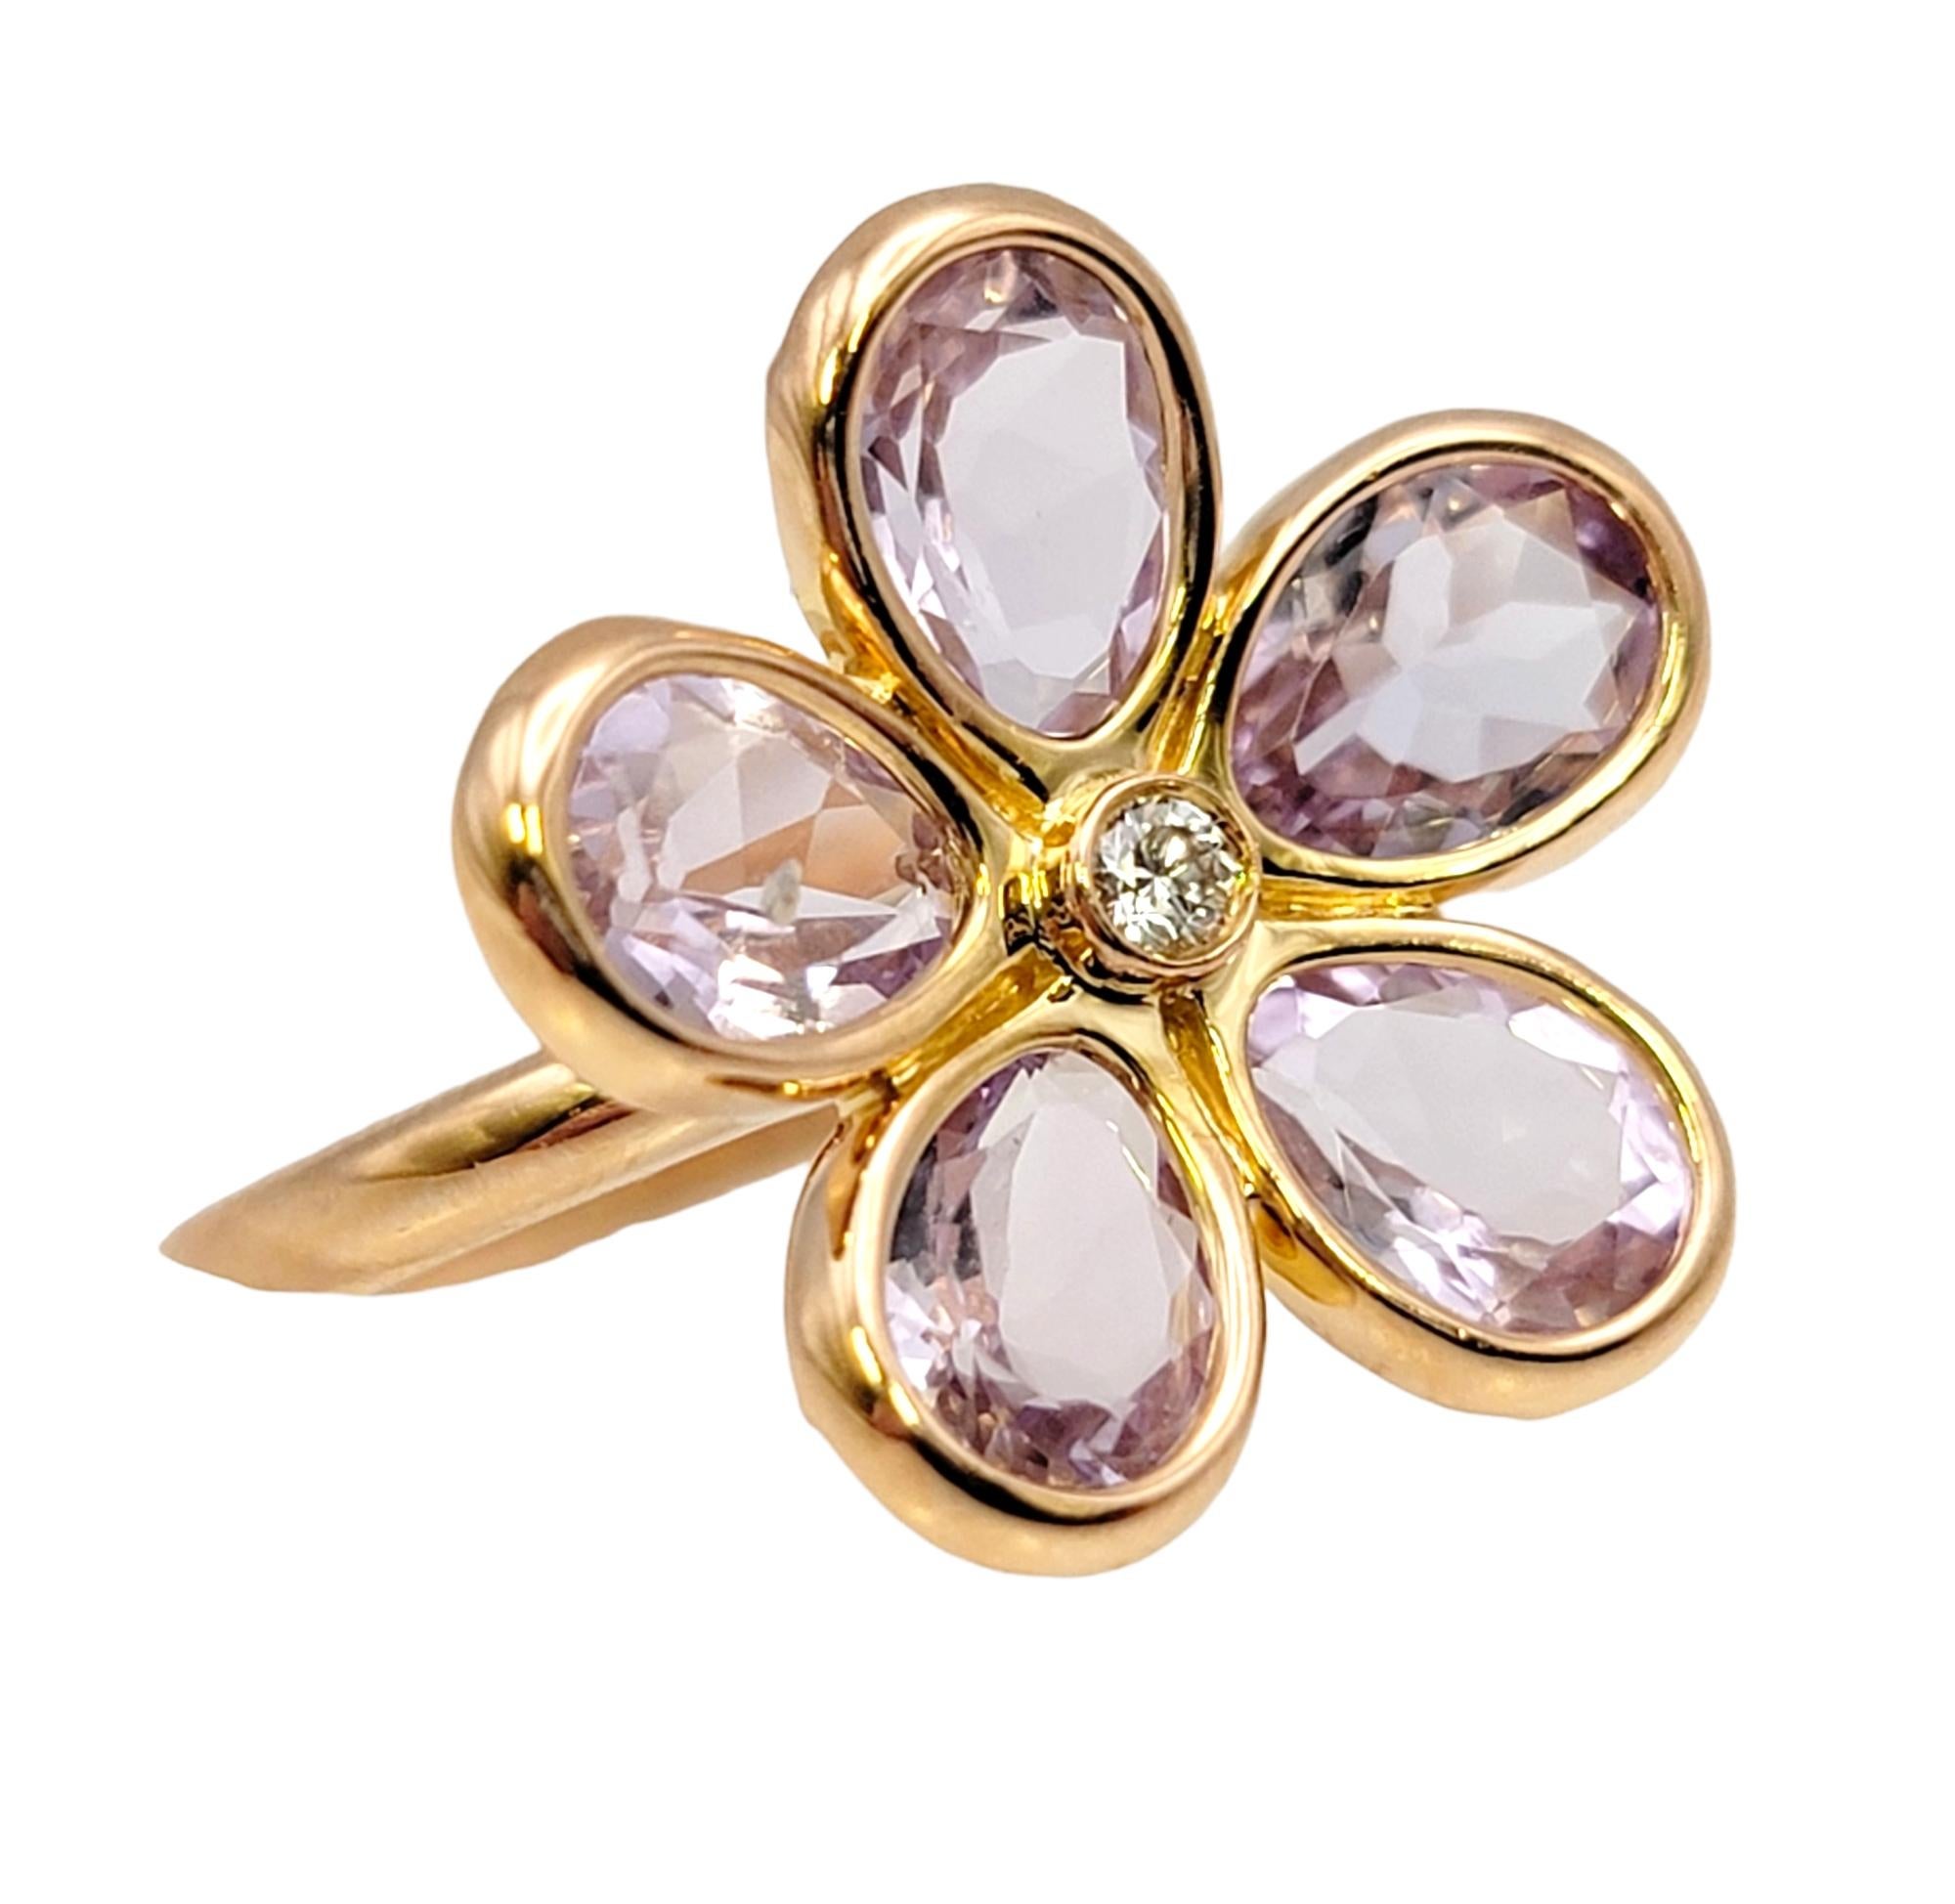 Ring size: 6

This fabulous and feminine flower ring by Tiffany & Co. will absolutely light up your finger! The dreamy light purple stones paired with the warm rose gold setting is absolutely stunning. The single diamond accent adds an extra bit of